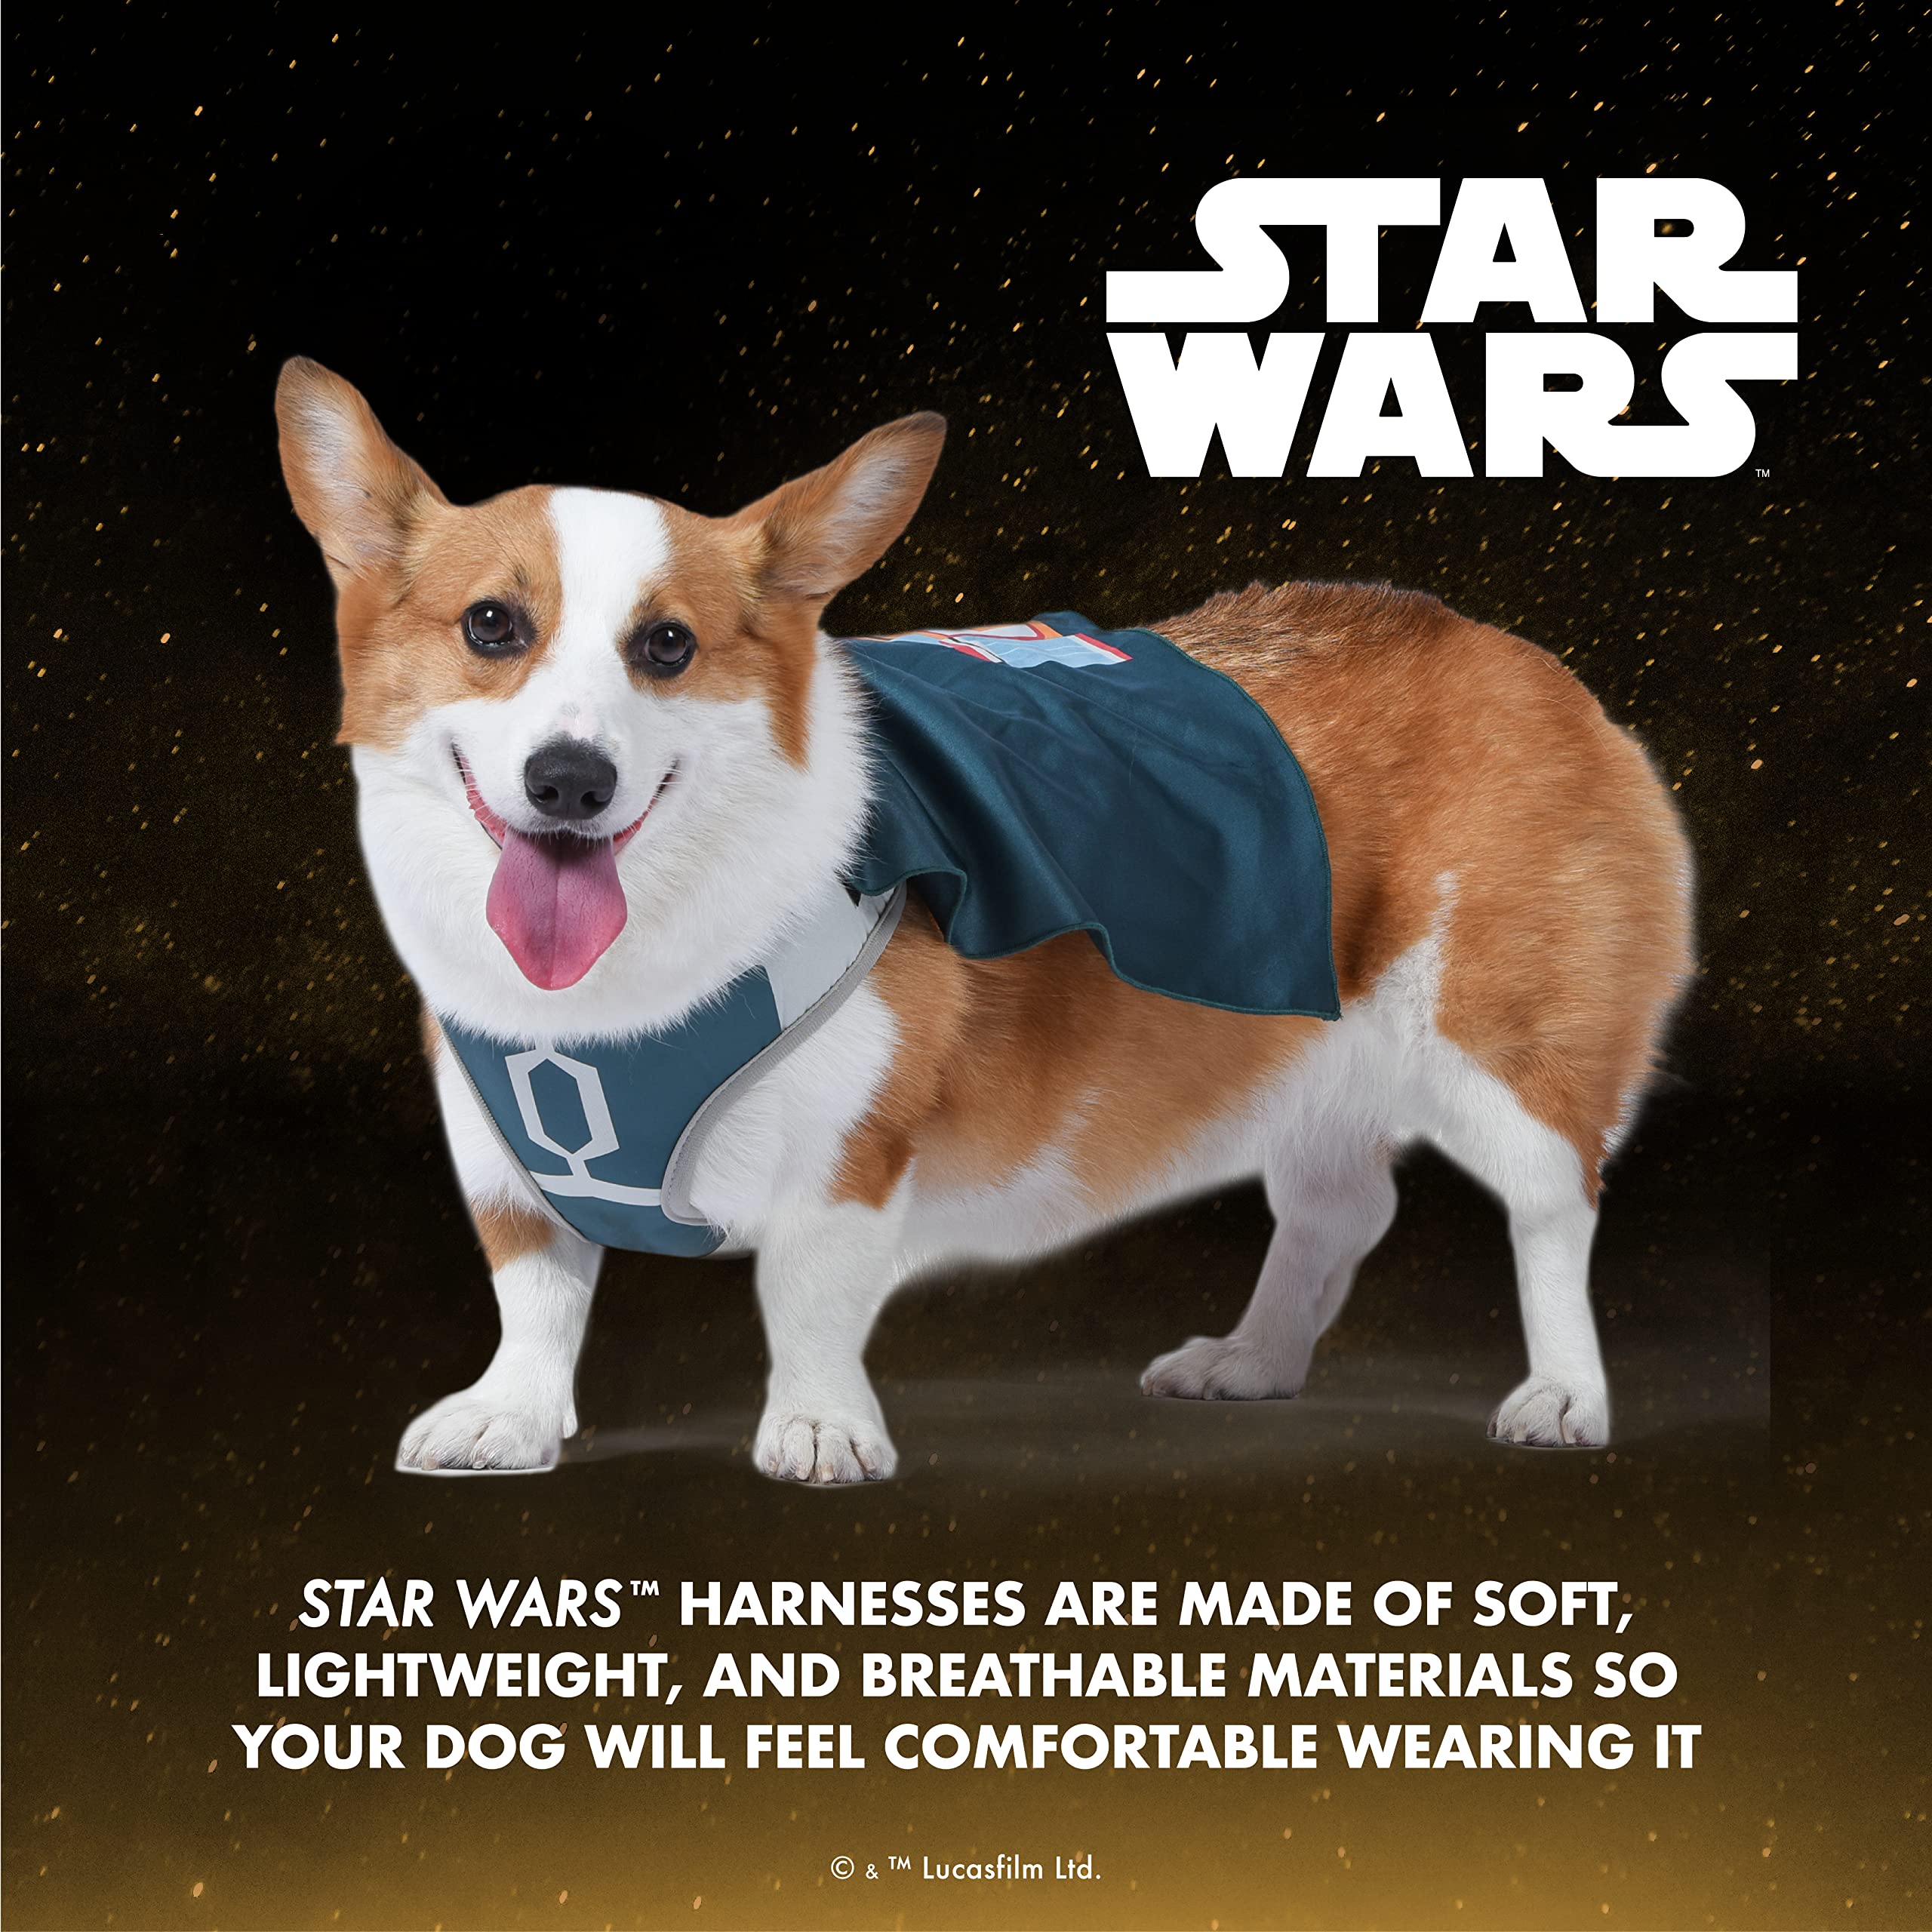 STAR WARS Pets Boba Fett Dog Harness with Cape (Medium) $6.43 + Free Shipping w/ Prime or on $35+